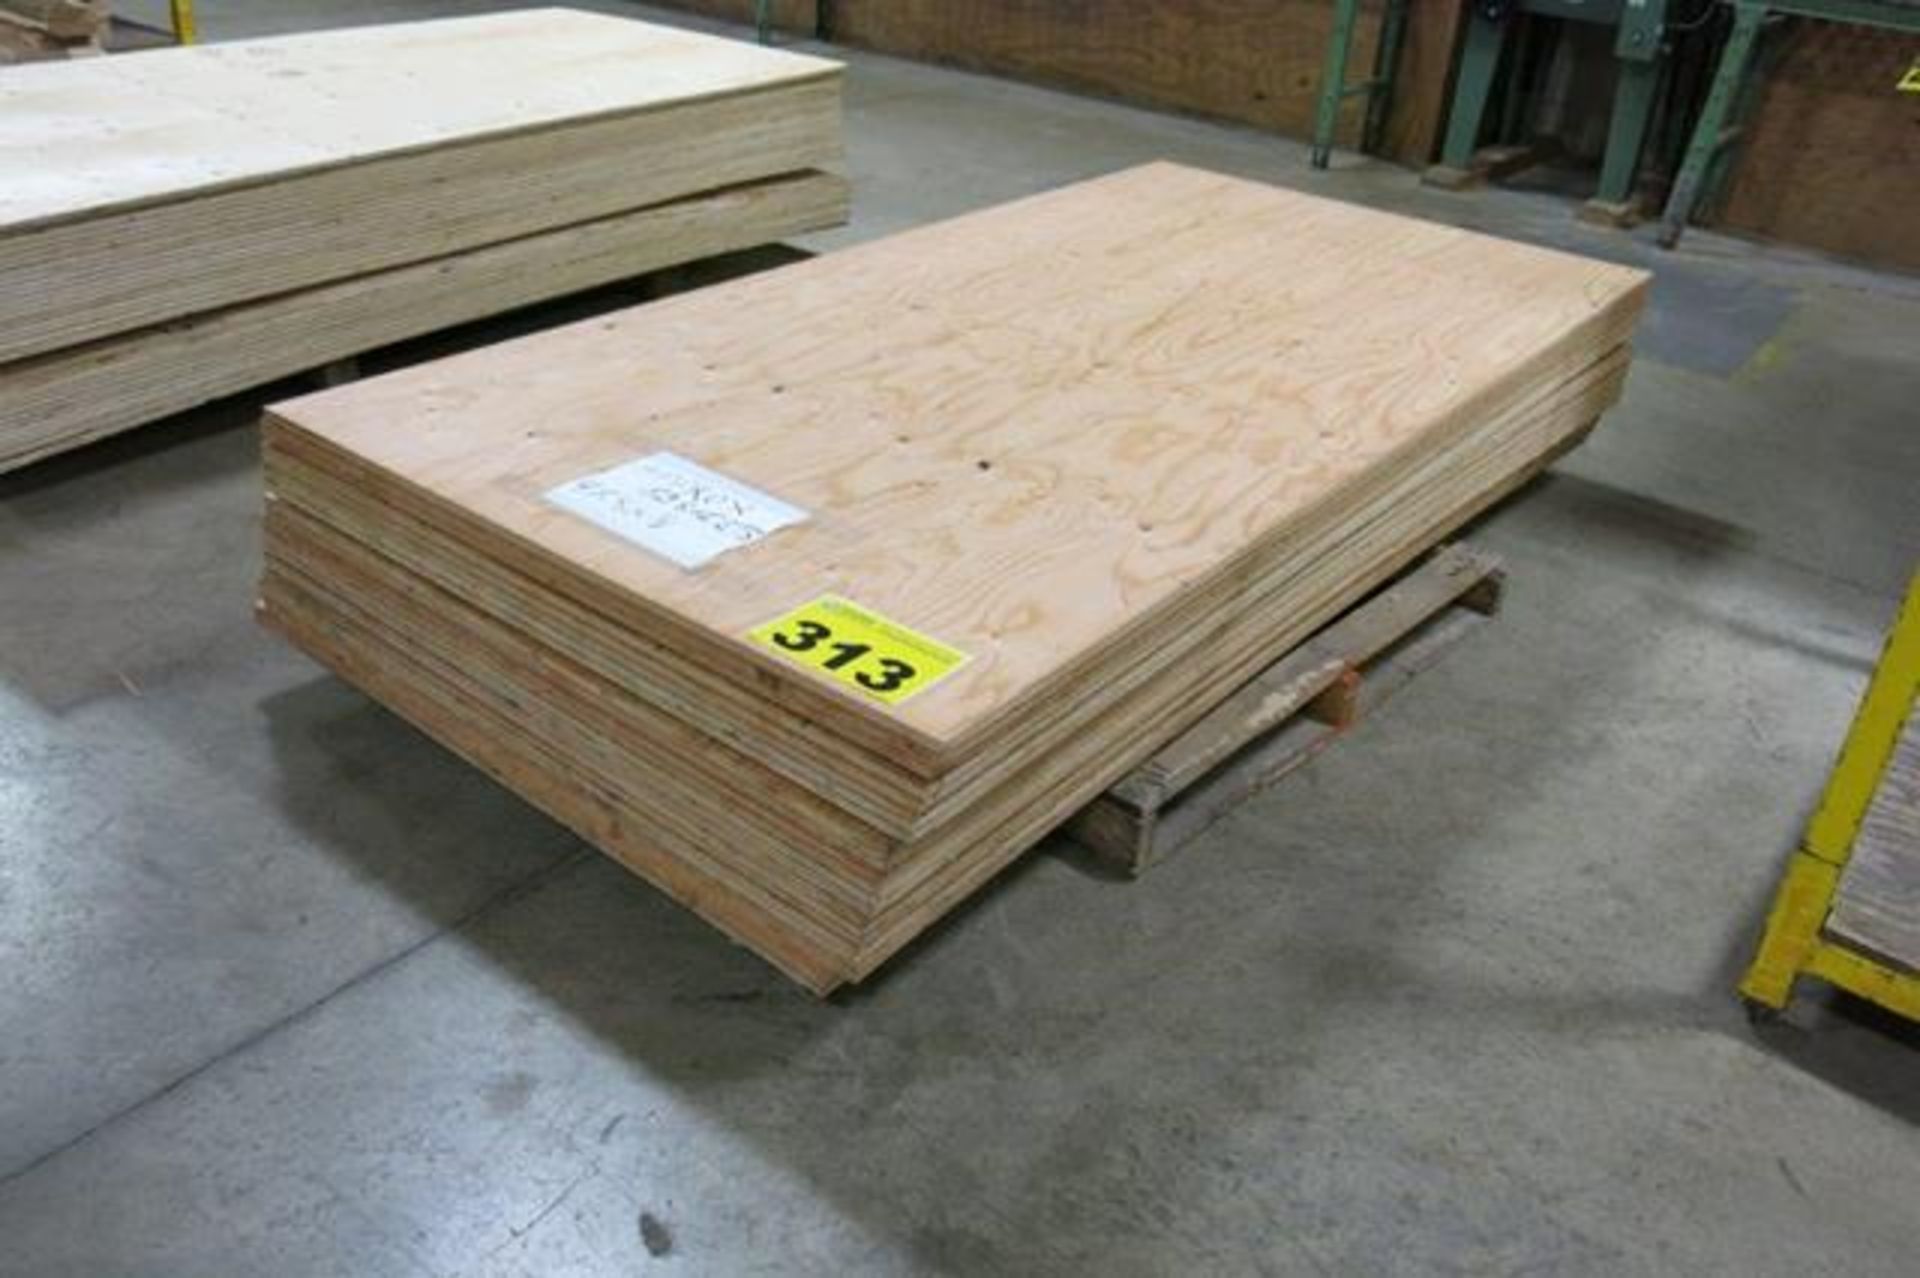 LOT OF 23 SHEETS (APPROX.) OF 4' X 8' X 3/8", PLYWOOD